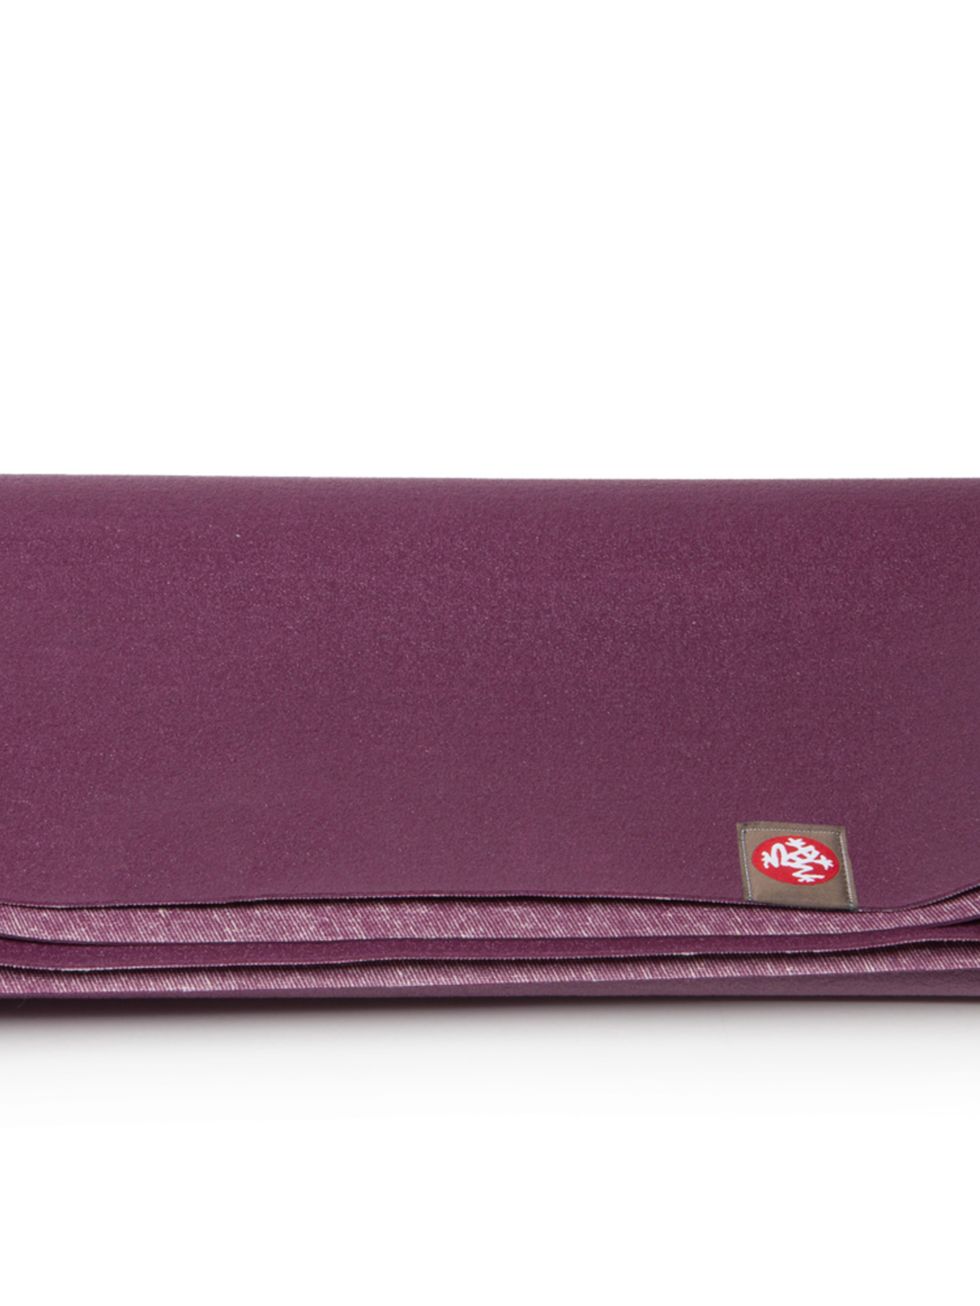 <p>Or, if you like your yoga on the go, this travel mat from <a href="http://www.manduka.com/us/shop/categories/products/mats/eko-superlite-travel-mat/">Manduka,</a> £26, folds up to fit in a suitcase, and weighs just 2lb. ELLE's resident yogi, <a href="h